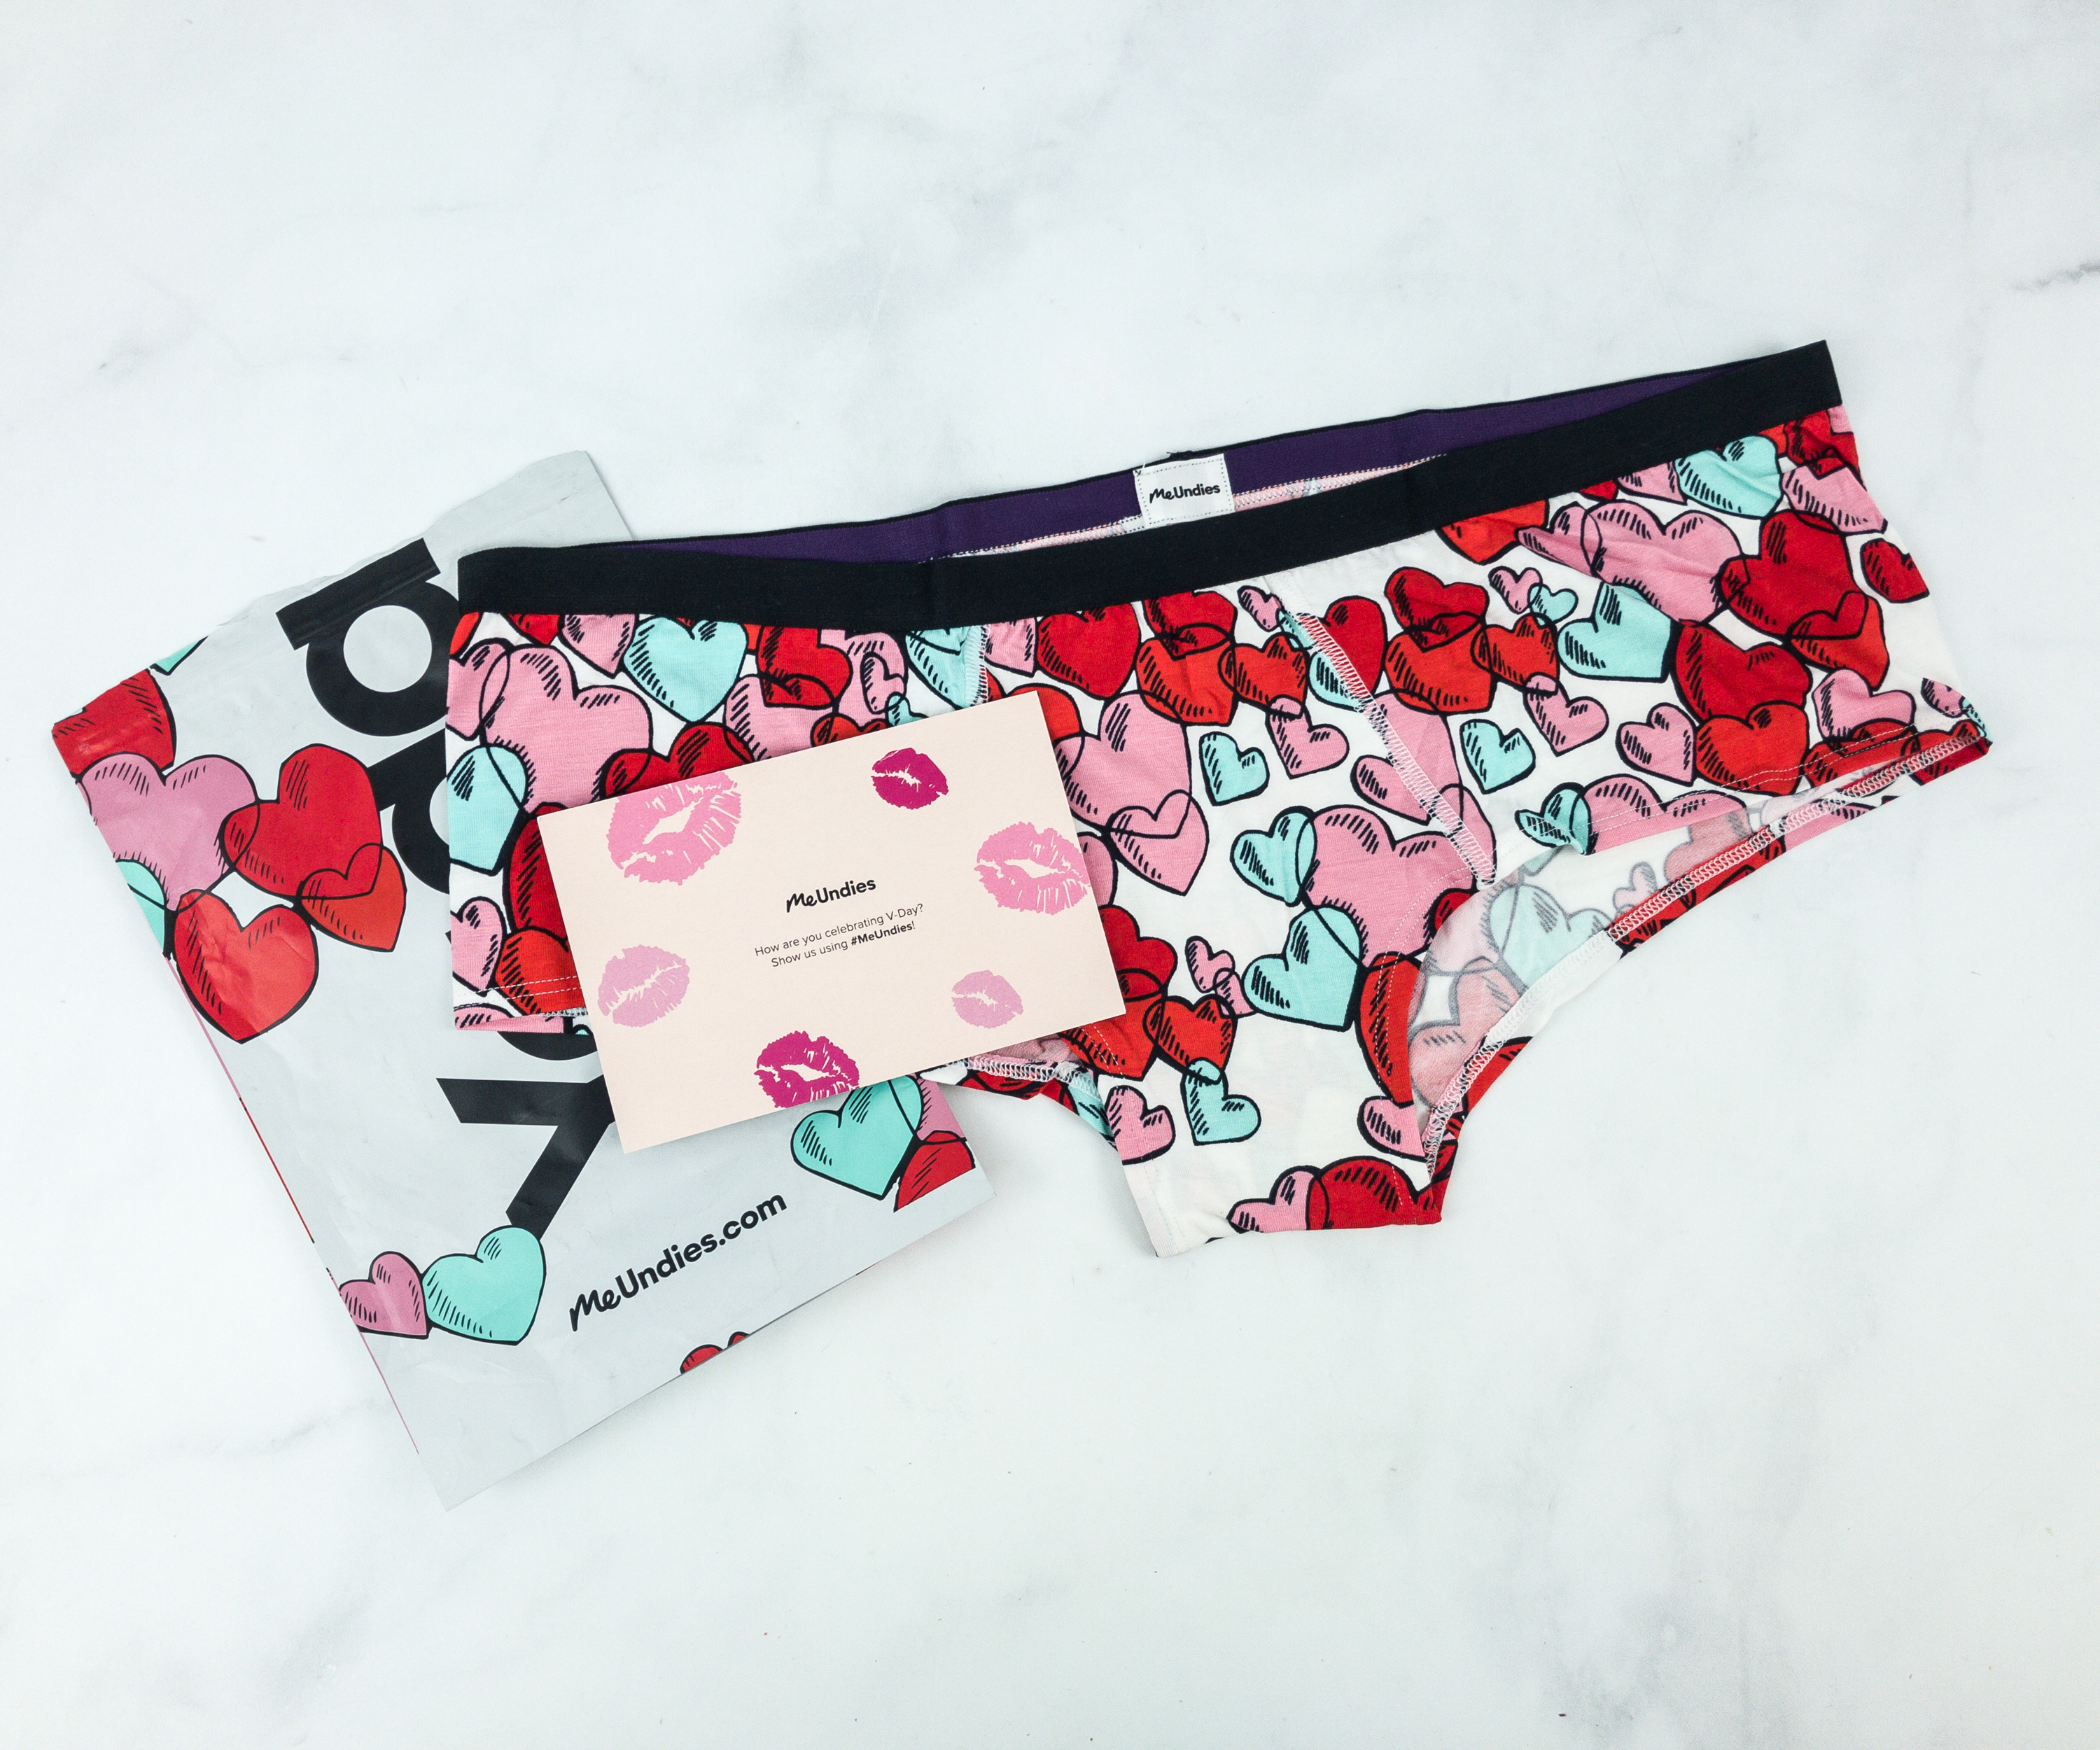 MeUndies Review: I Tried Their Most Popular Styles